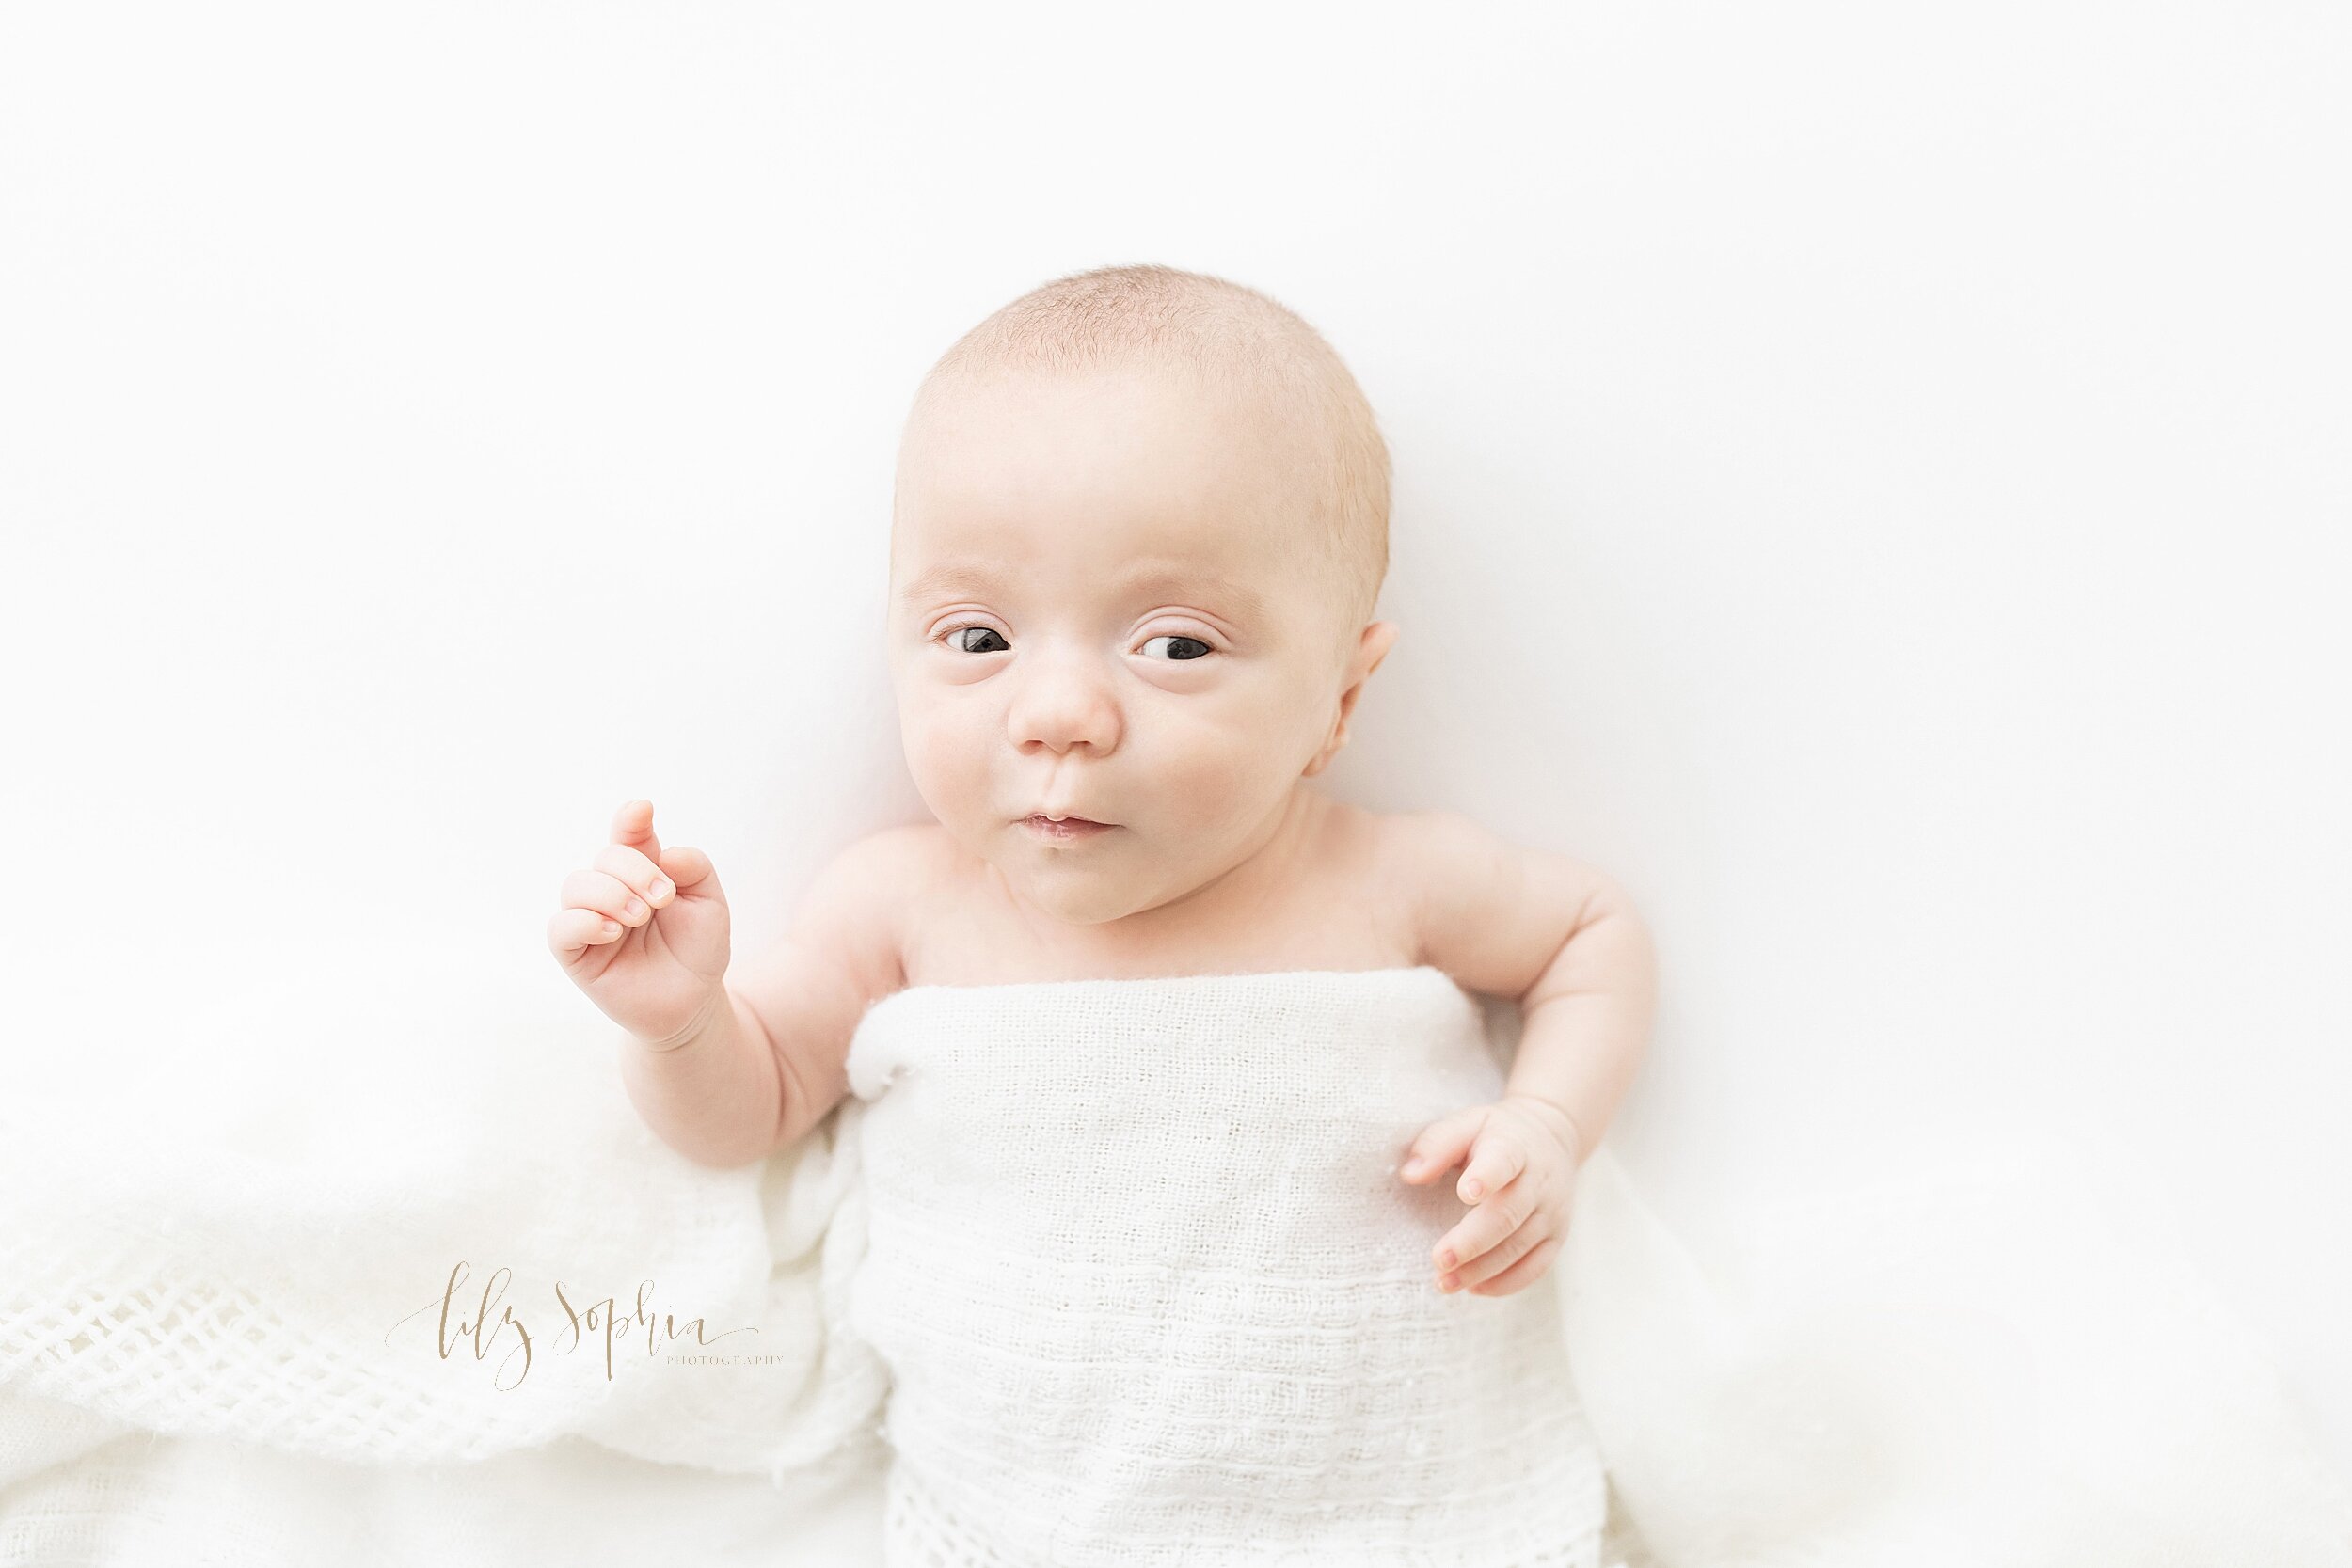  Newborn photograph of an awake infant boy draped with a white knitted blanket as he raises one arm and appears to want to speak taken in a natural light studio near Midtown in Atlanta, Georgia. 